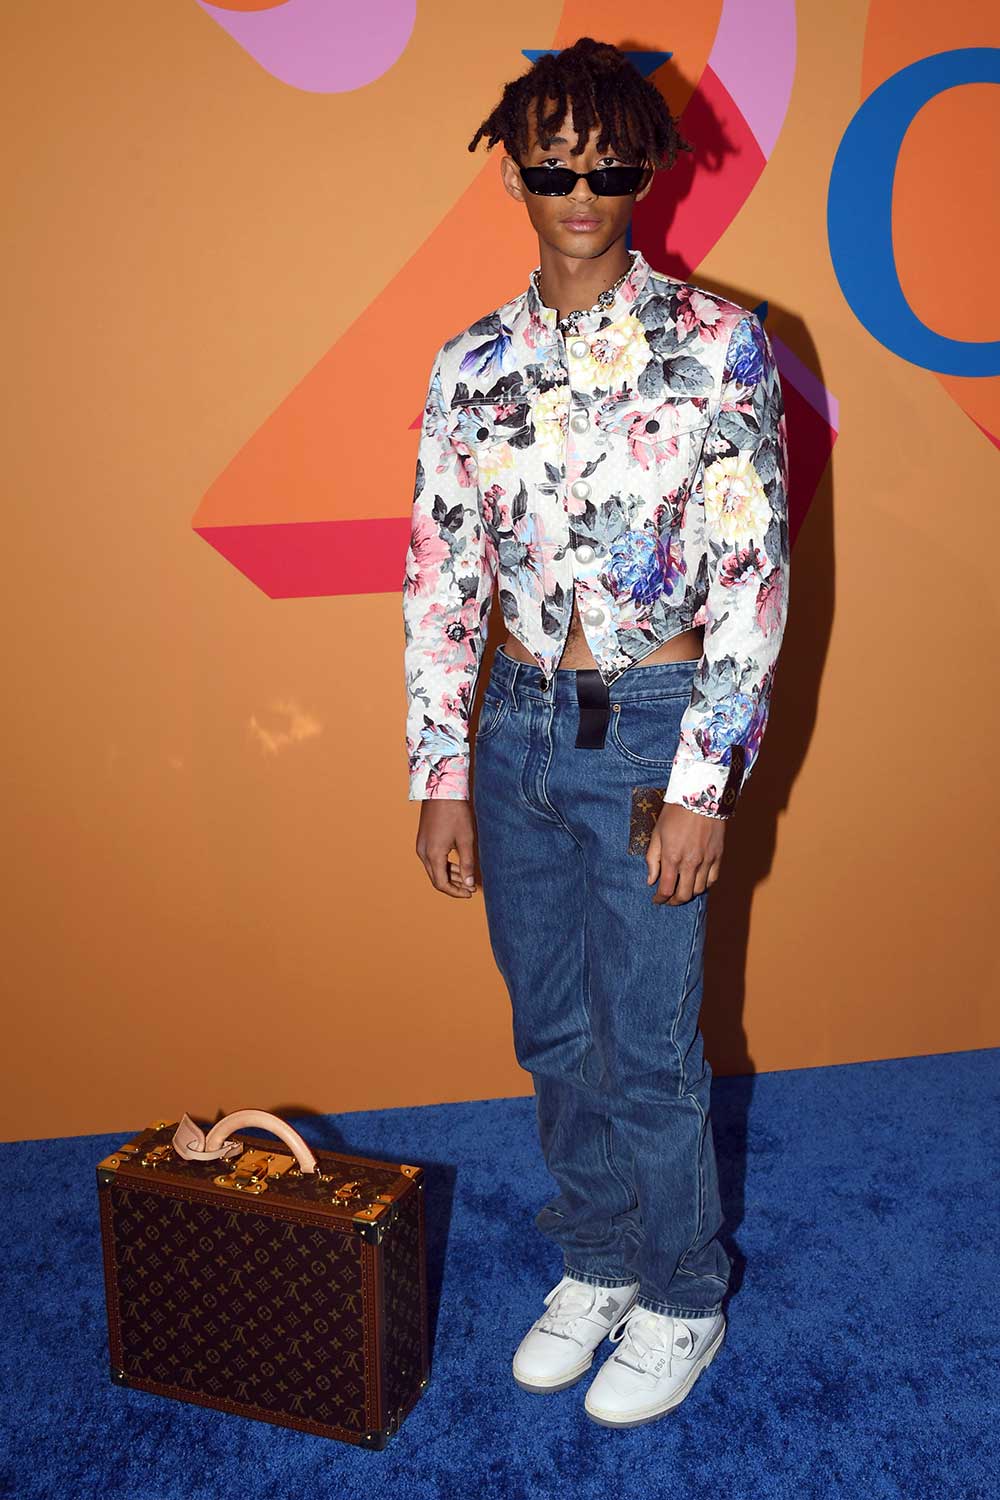 SPOTTED: Jaden Smith At The Louis Vuitton Exhibition In Louis